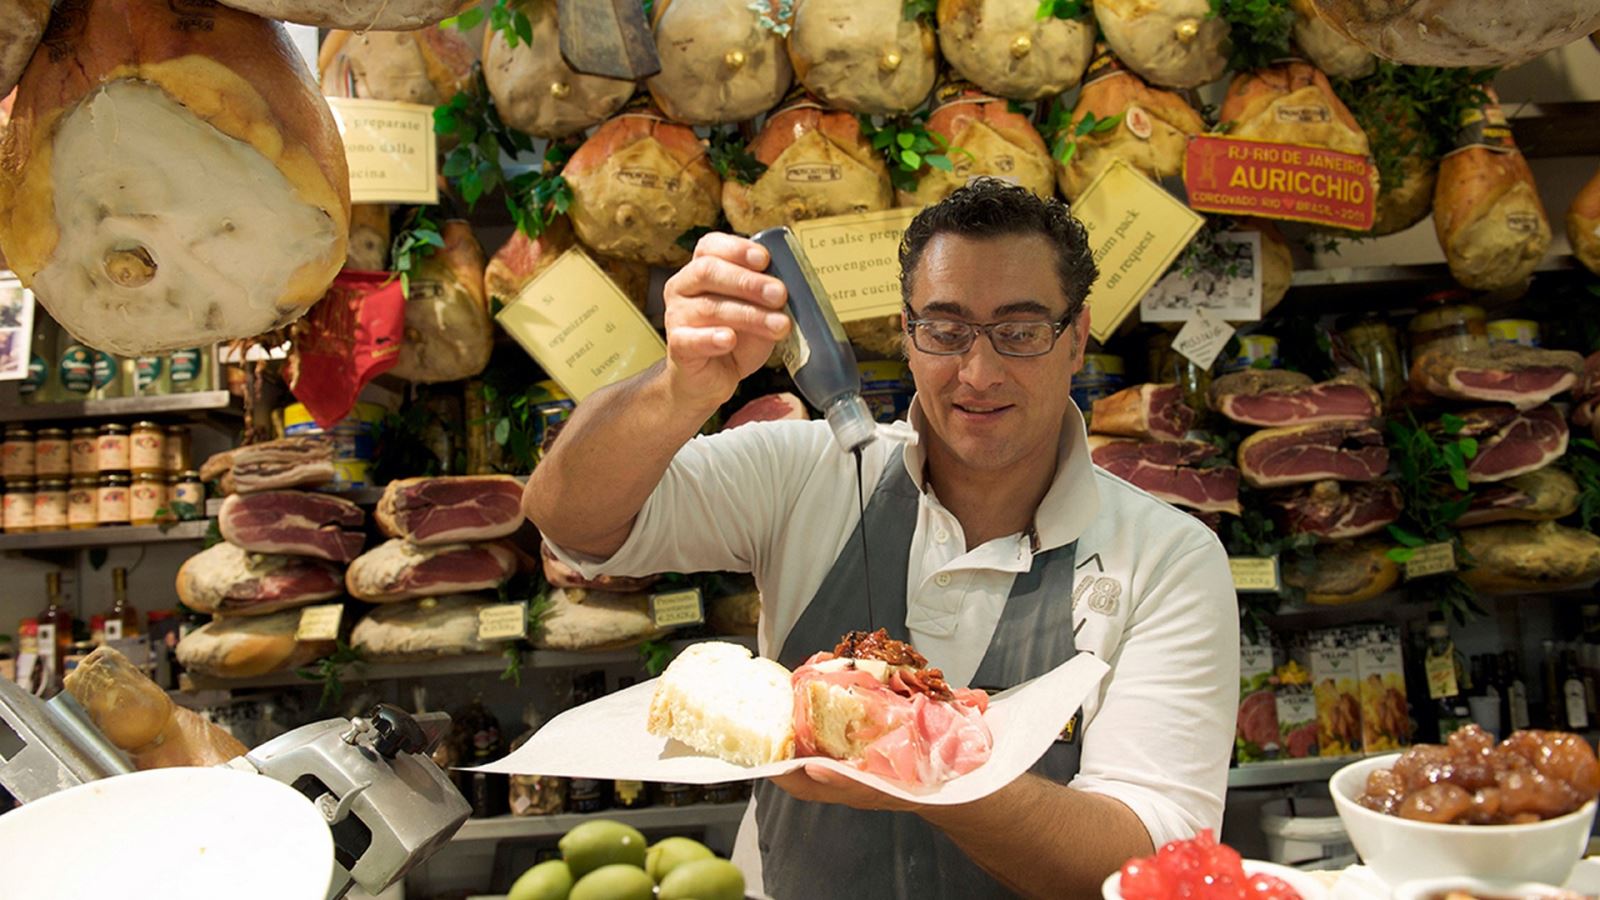 Try a freshly made Tuscan sandwich for size. Photo: Hemis/Alamy